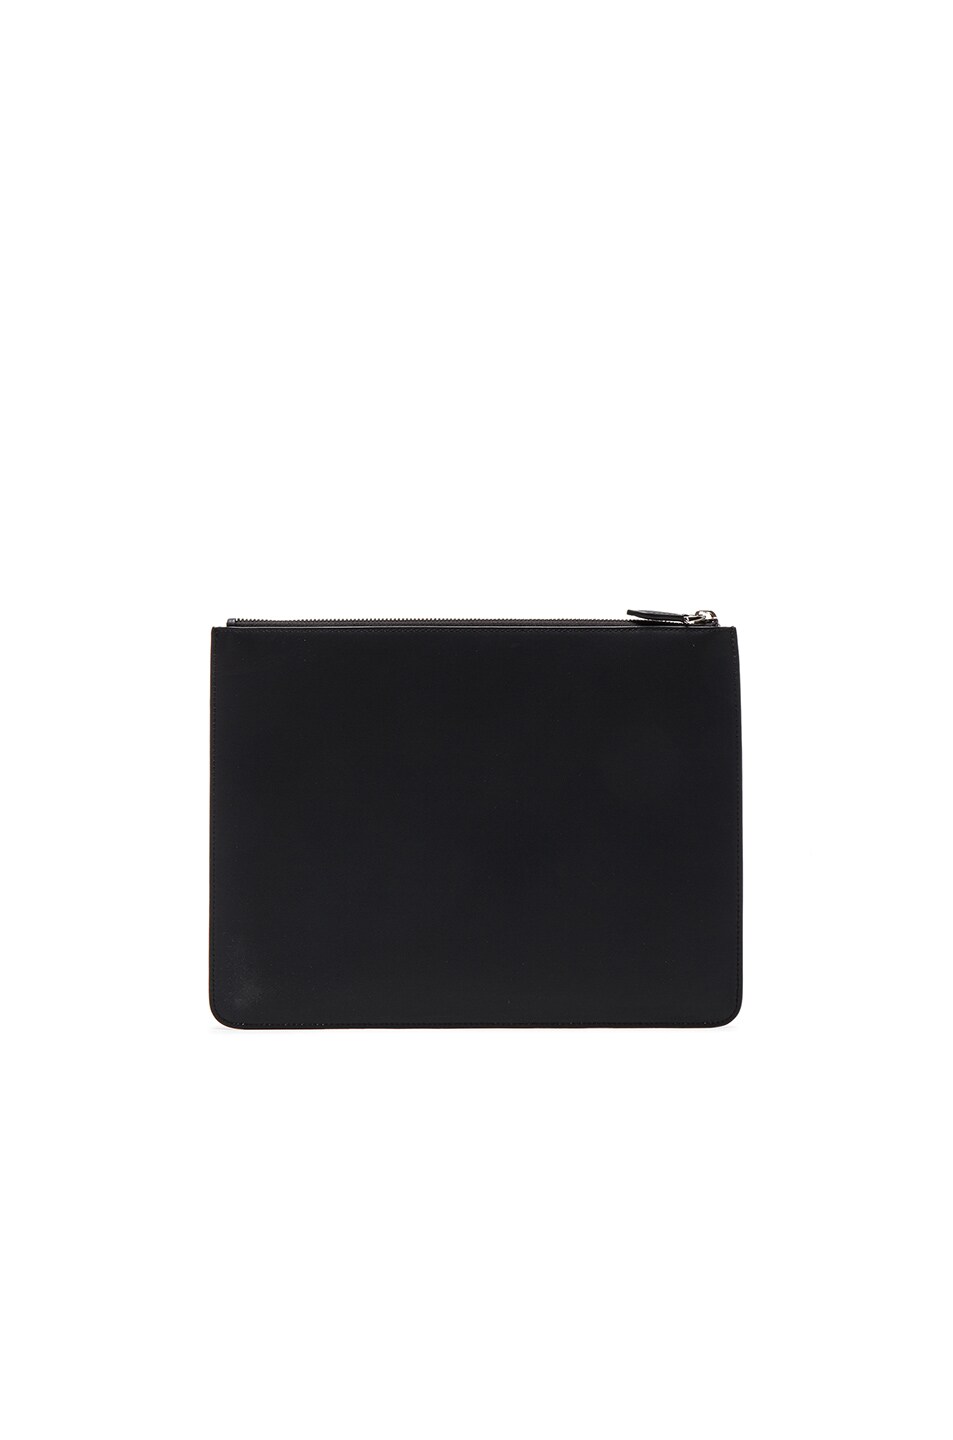 GIVENCHY Army Skull Print Pouch in Black